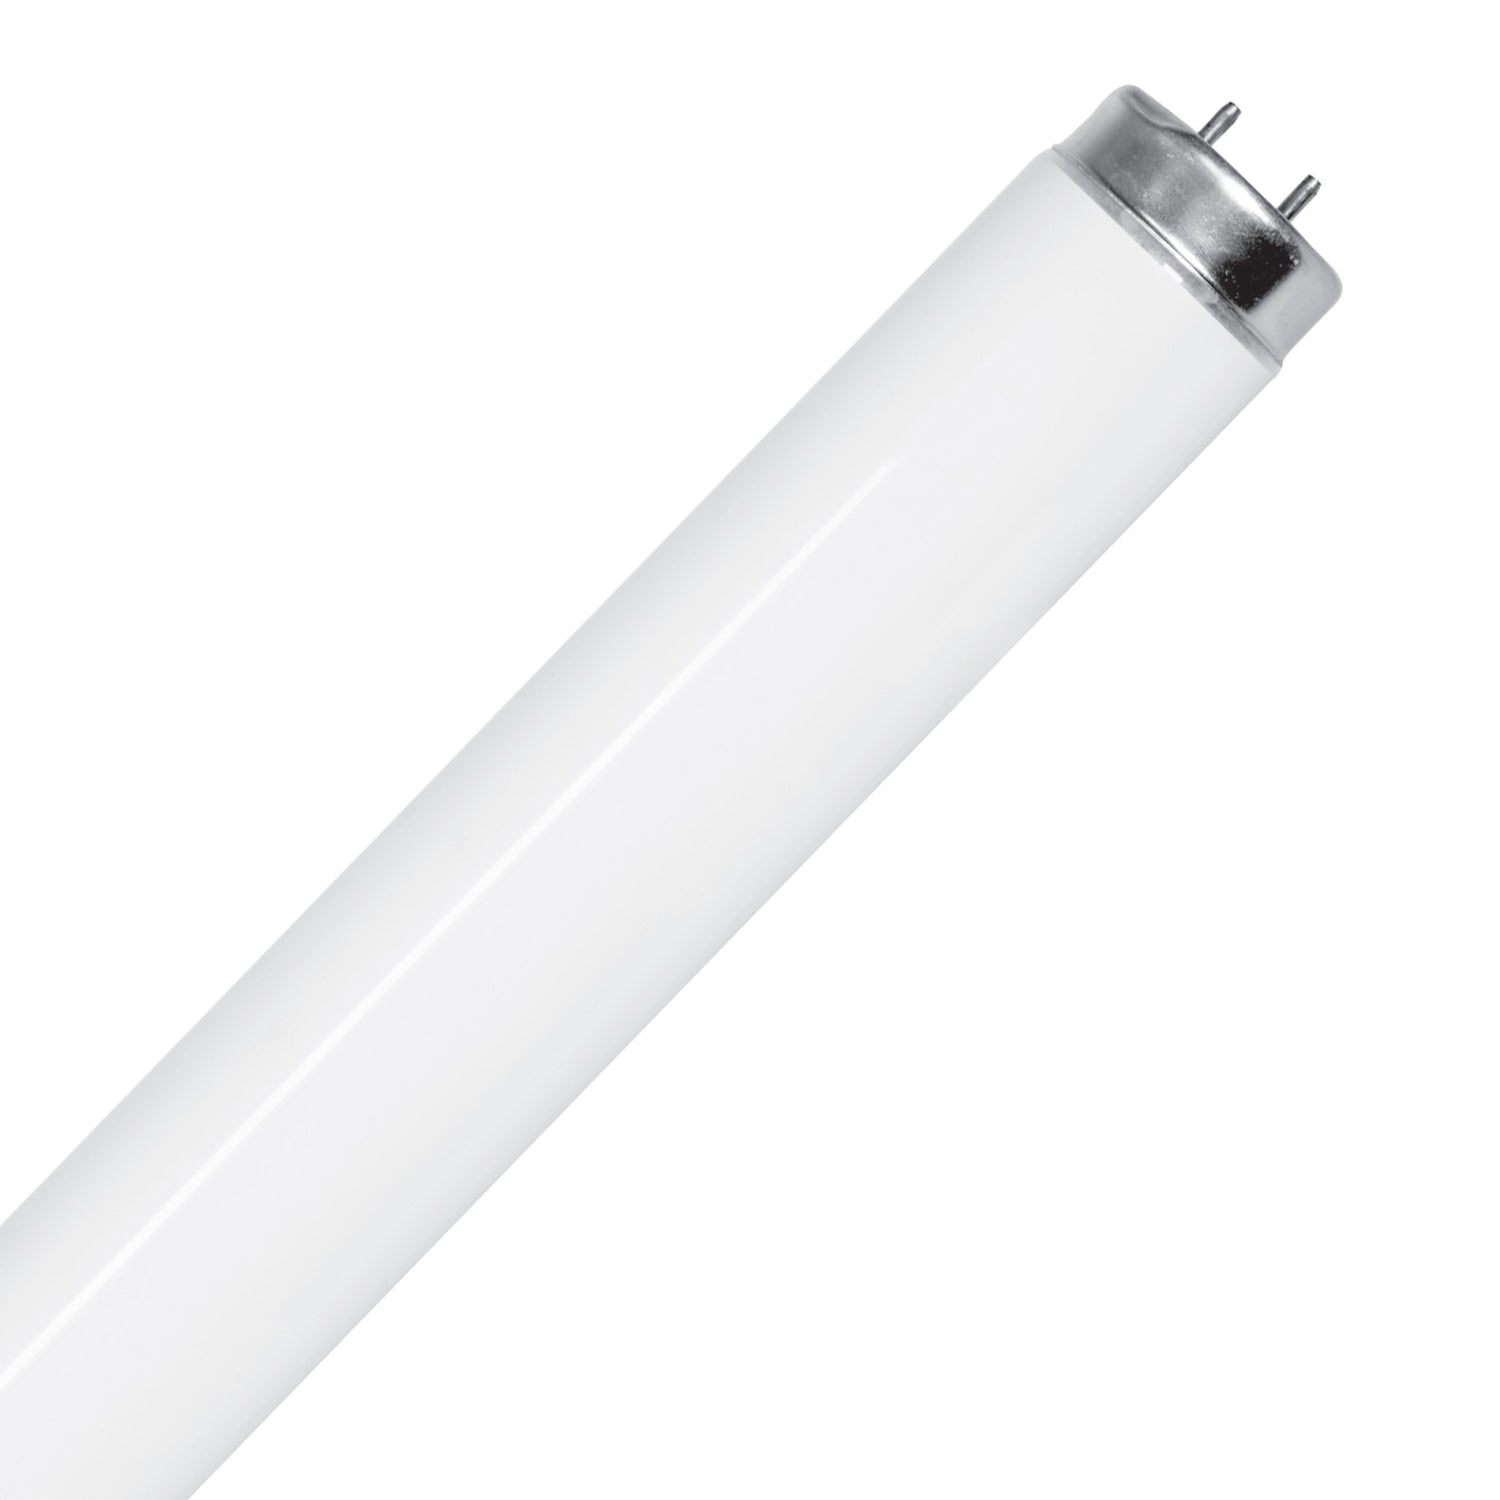 18 in. 15W Cool White (4100K) G13 Base (T12 Replacement) Fluorescent Linear Light Tube